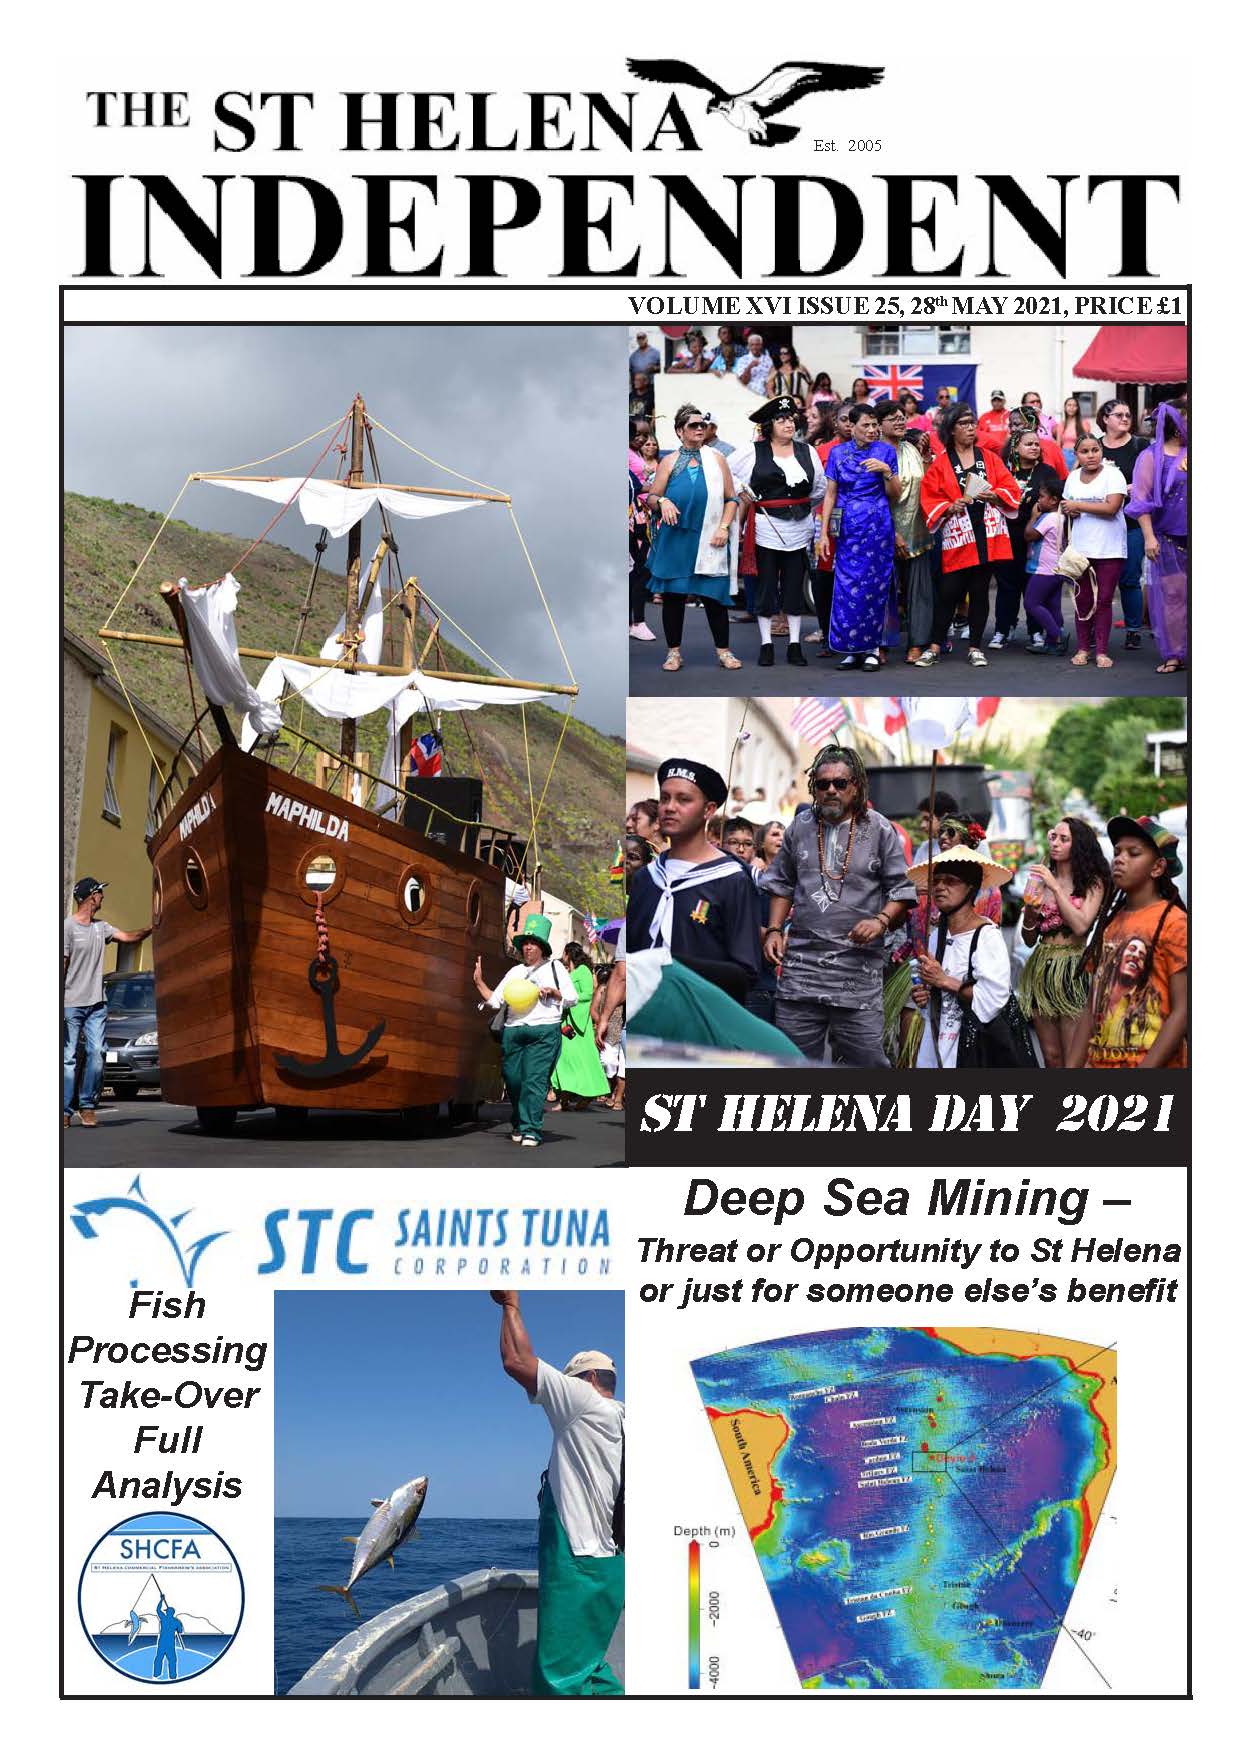 St Helena Independent 20210528 p1